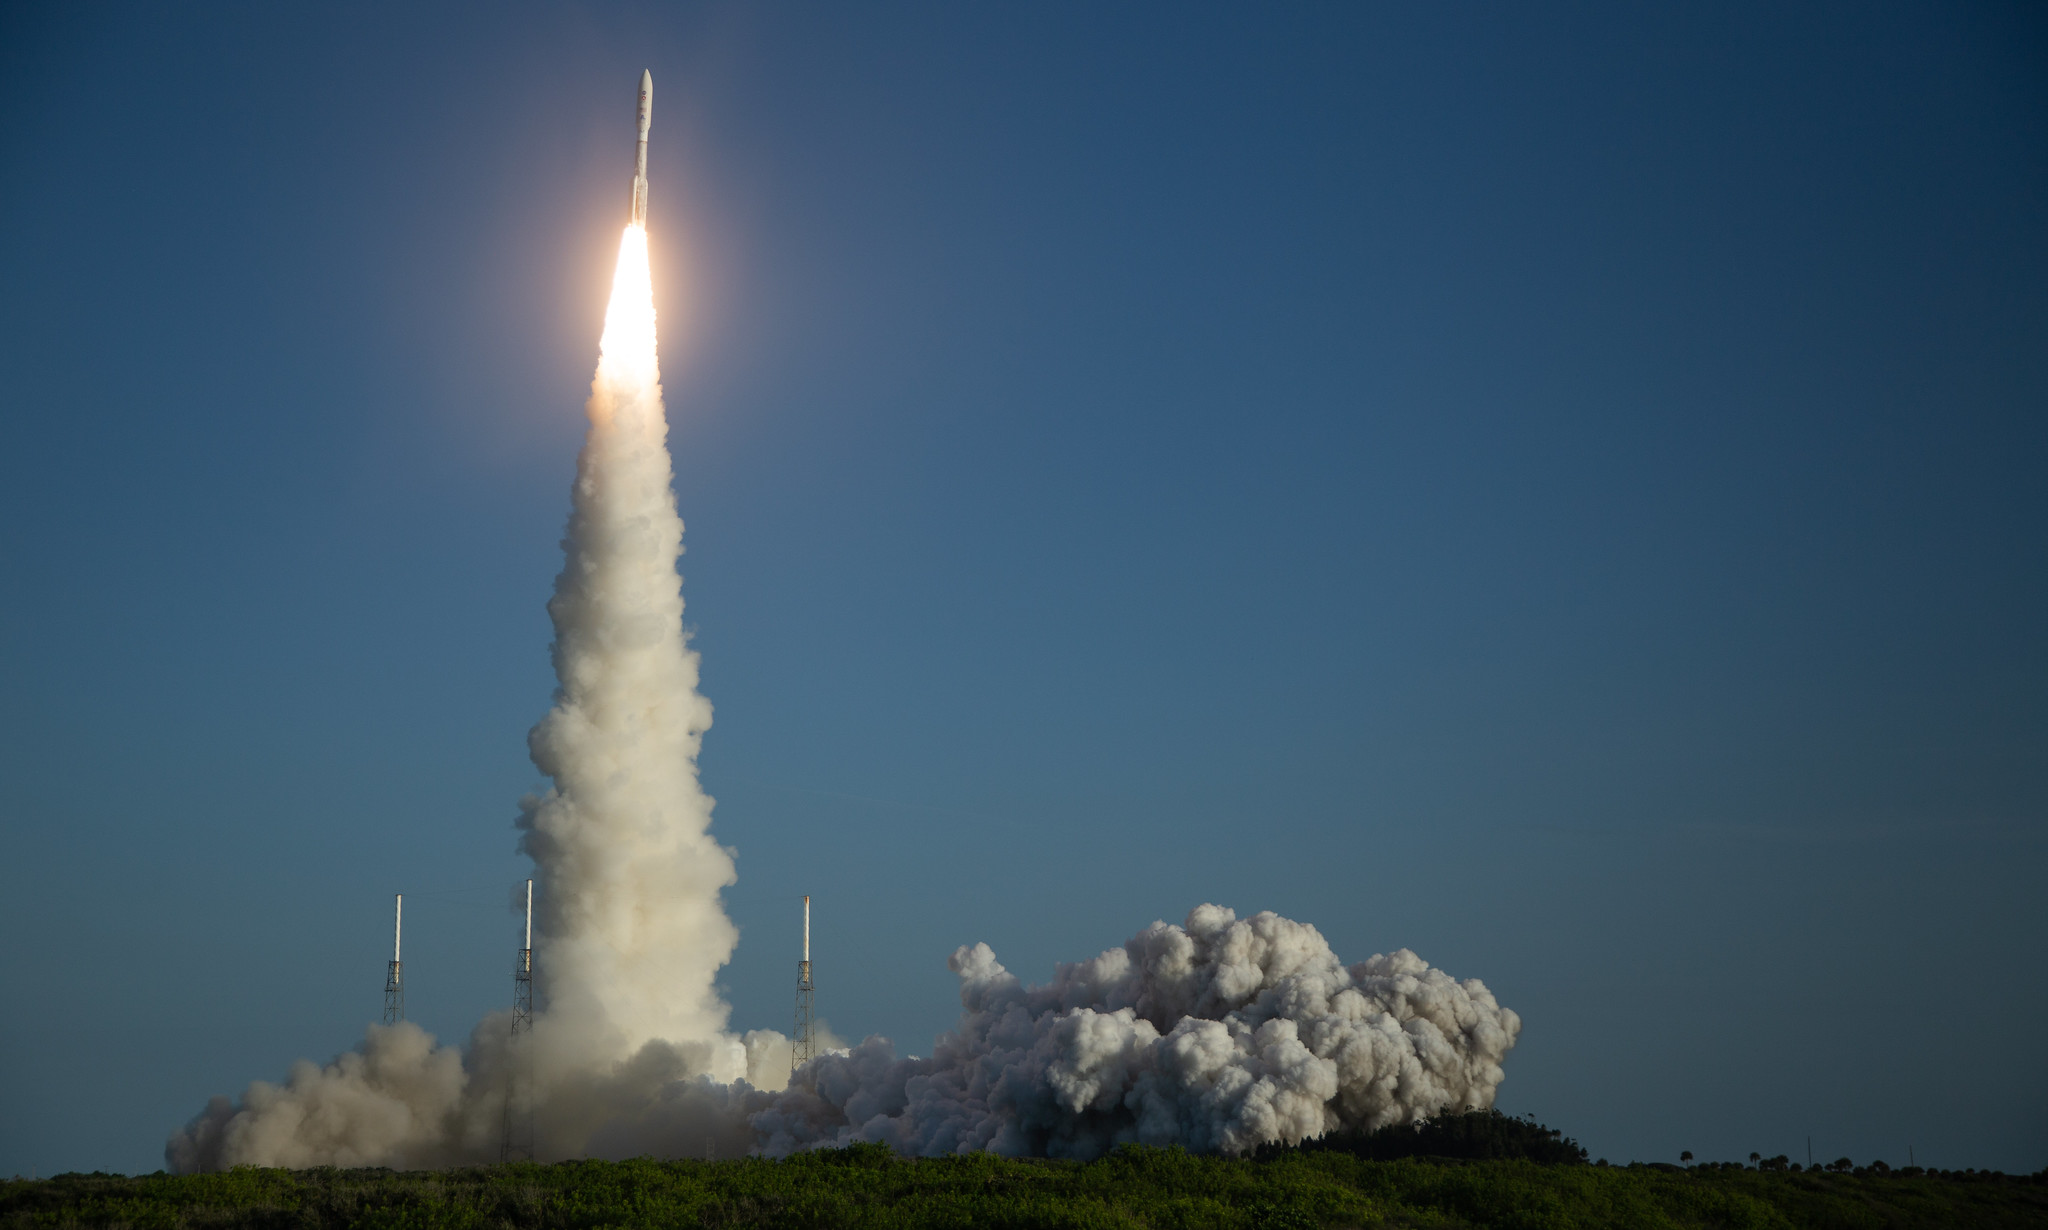 A United Launch Alliance Atlas V rocket with NASA’s Mars 2020 Perseverance rover onboard launches from Space Launch Complex 41 